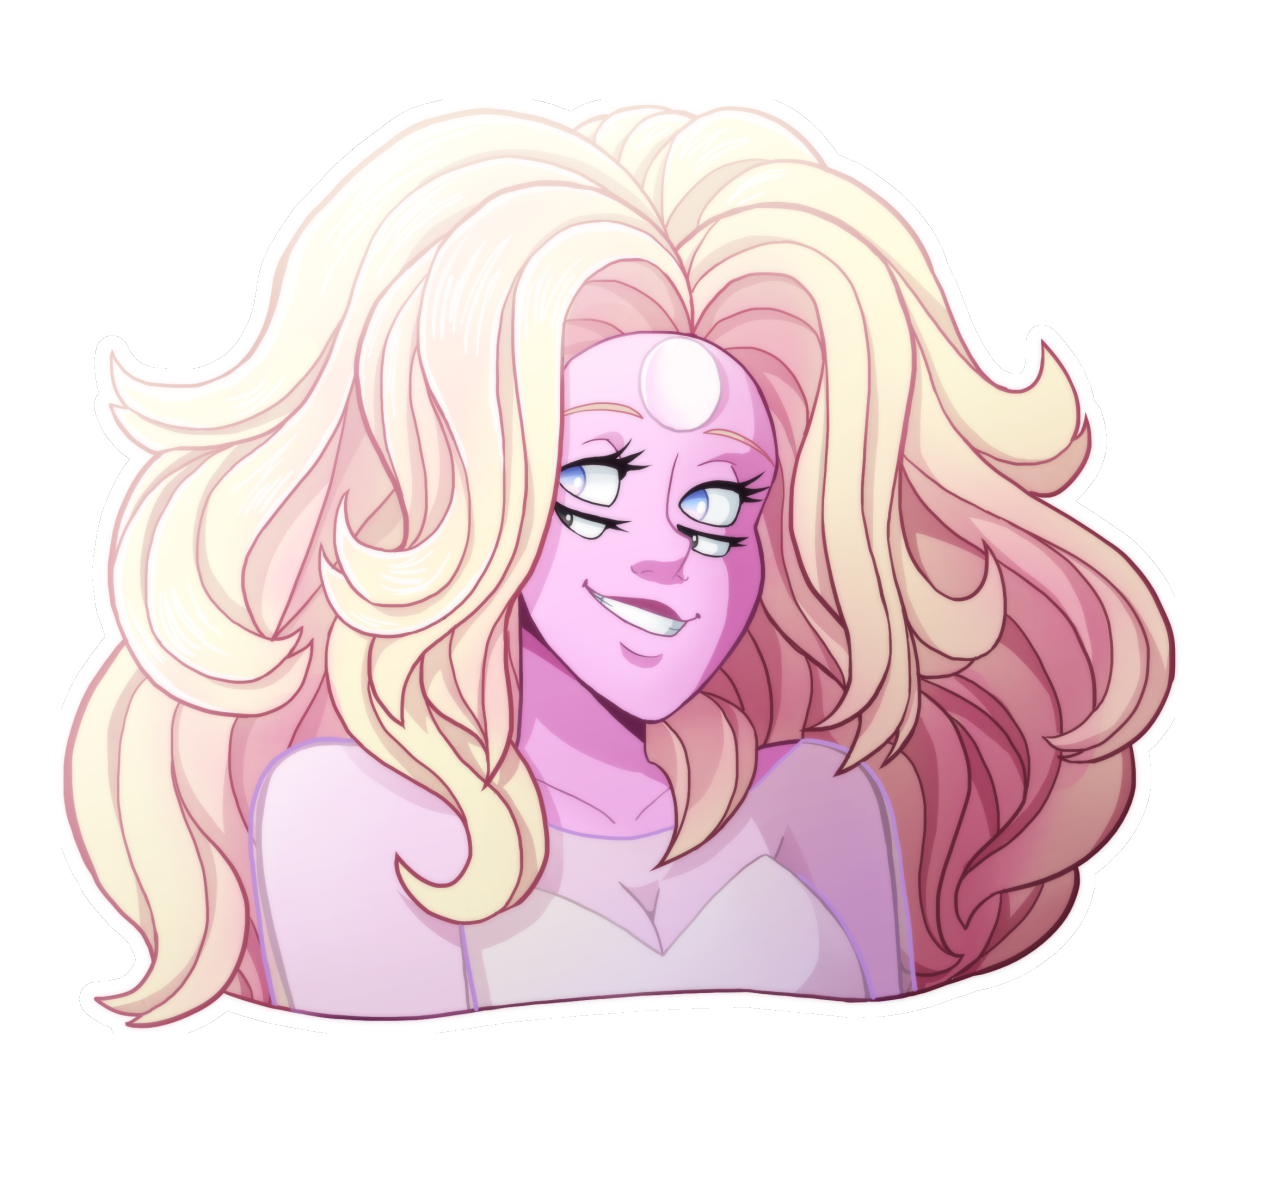 sadgems2018blued said: I want more rainbow quartz 1.0 please, I loved your drawings. Answer: Thank you! Have a quick one here